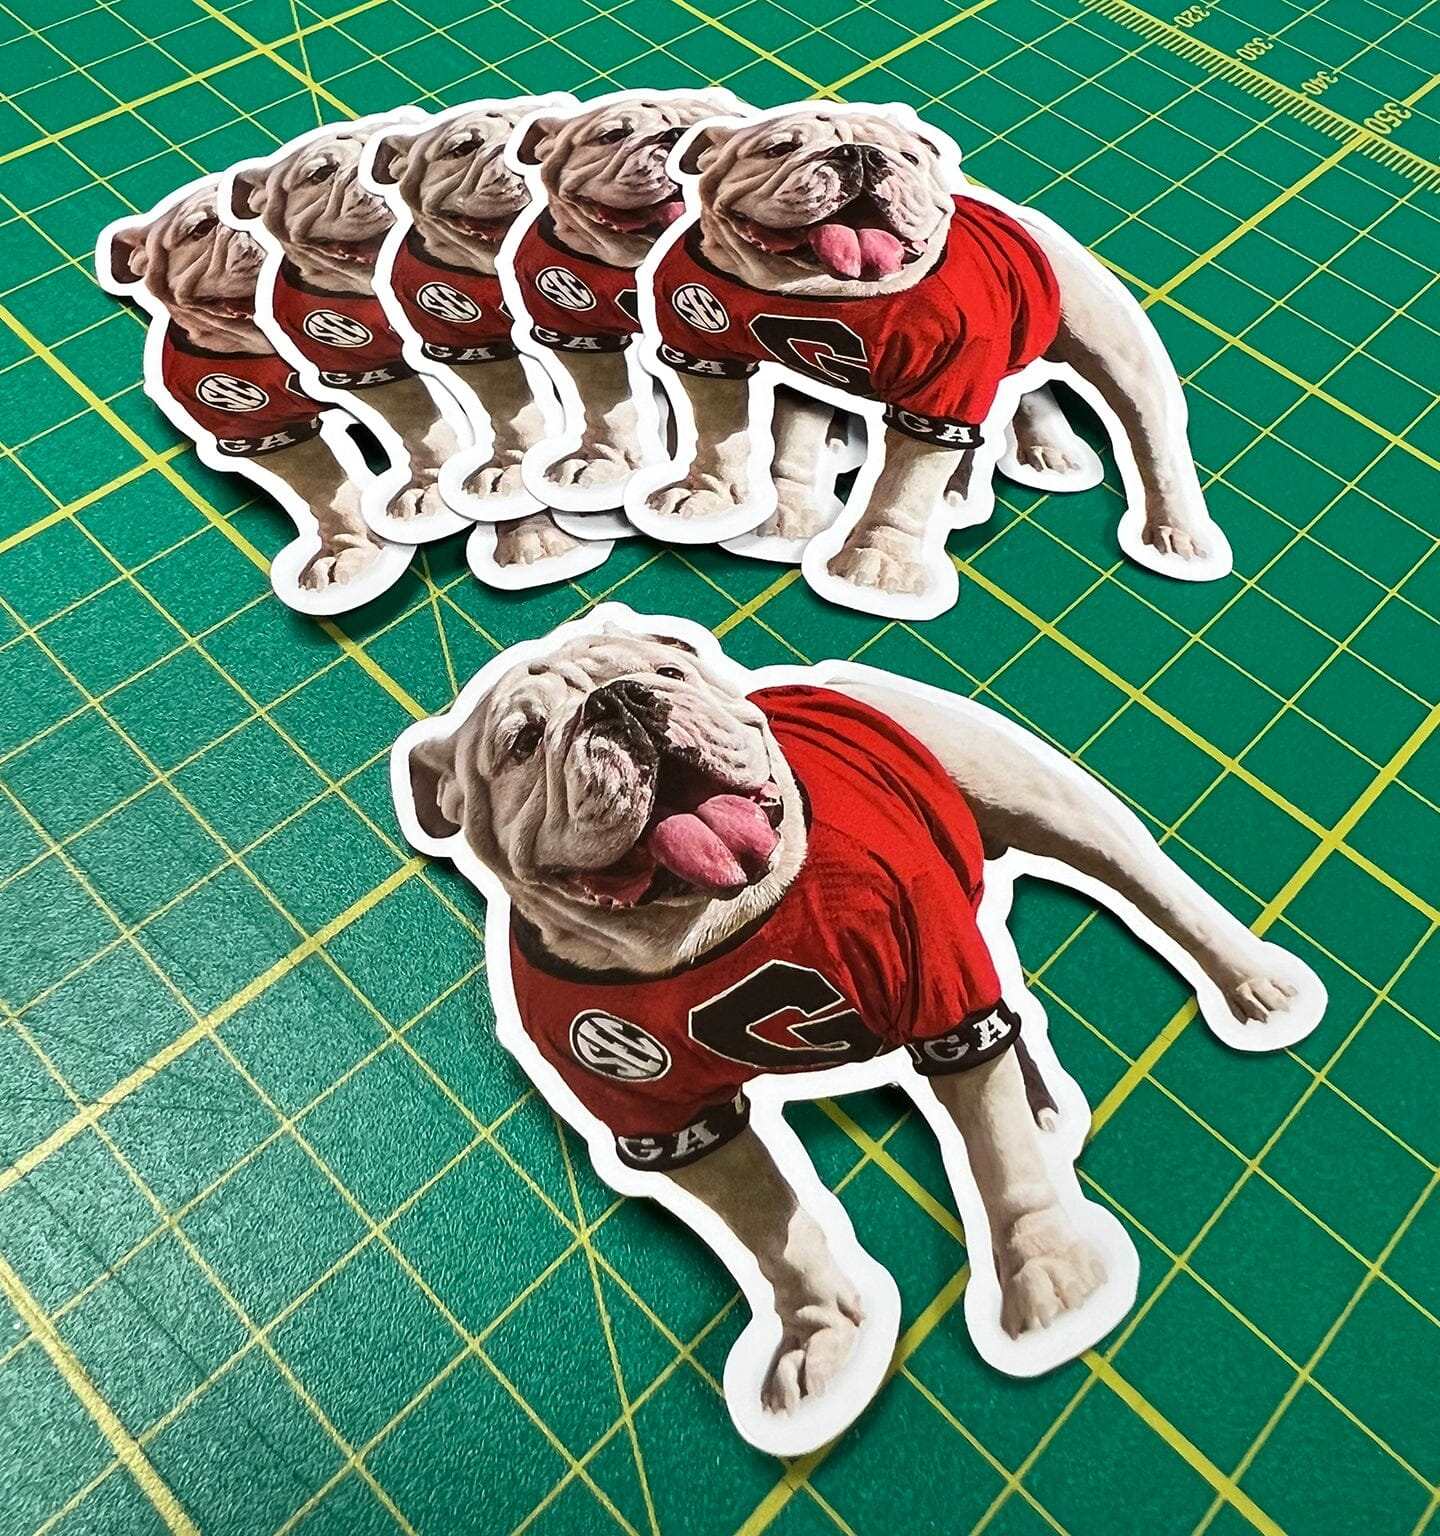 UGA Georgia Bulldogs Sticker 6-Pack - Uga X Mascot in the Endzone - 2.75" Die Cut Vinyl Photo Decal for Gift Wrap, Graduation Invitations, Stationary - WRIGHT PHOTO